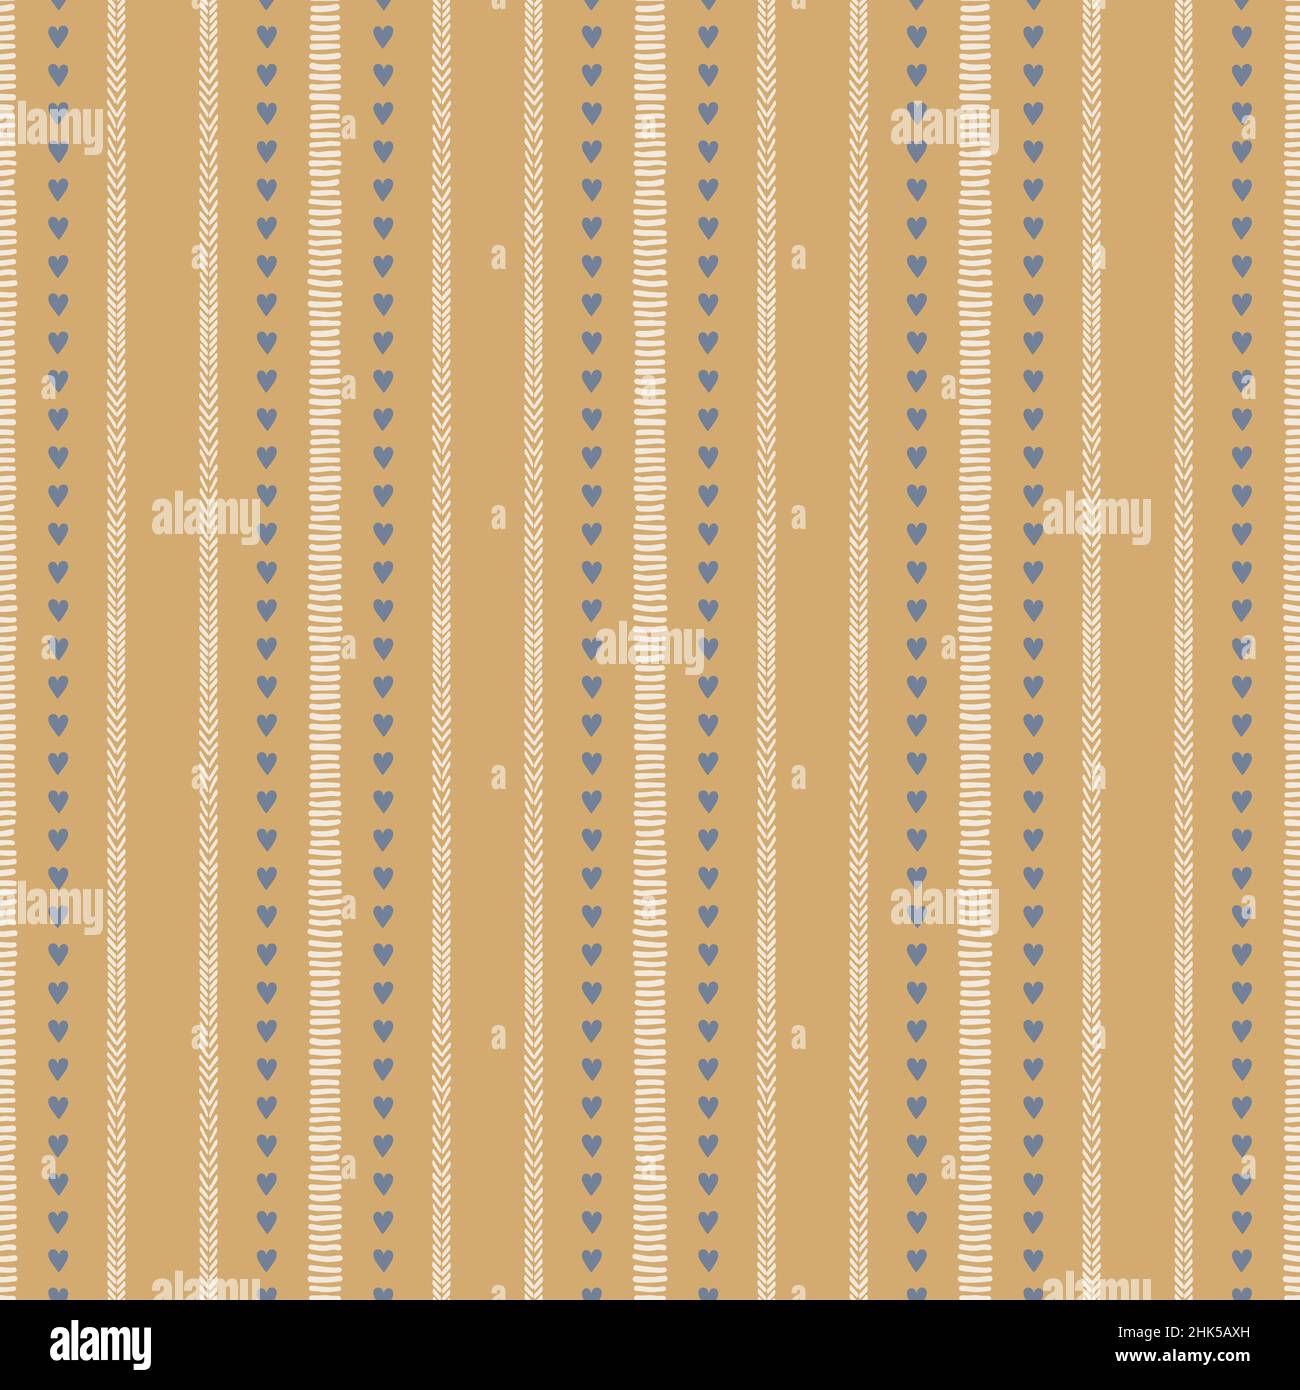 Seamless French country kitchen stripe fabric pattern print. Yellow white vertical striped background. Batik dye provence style rustic woven Stock Vector